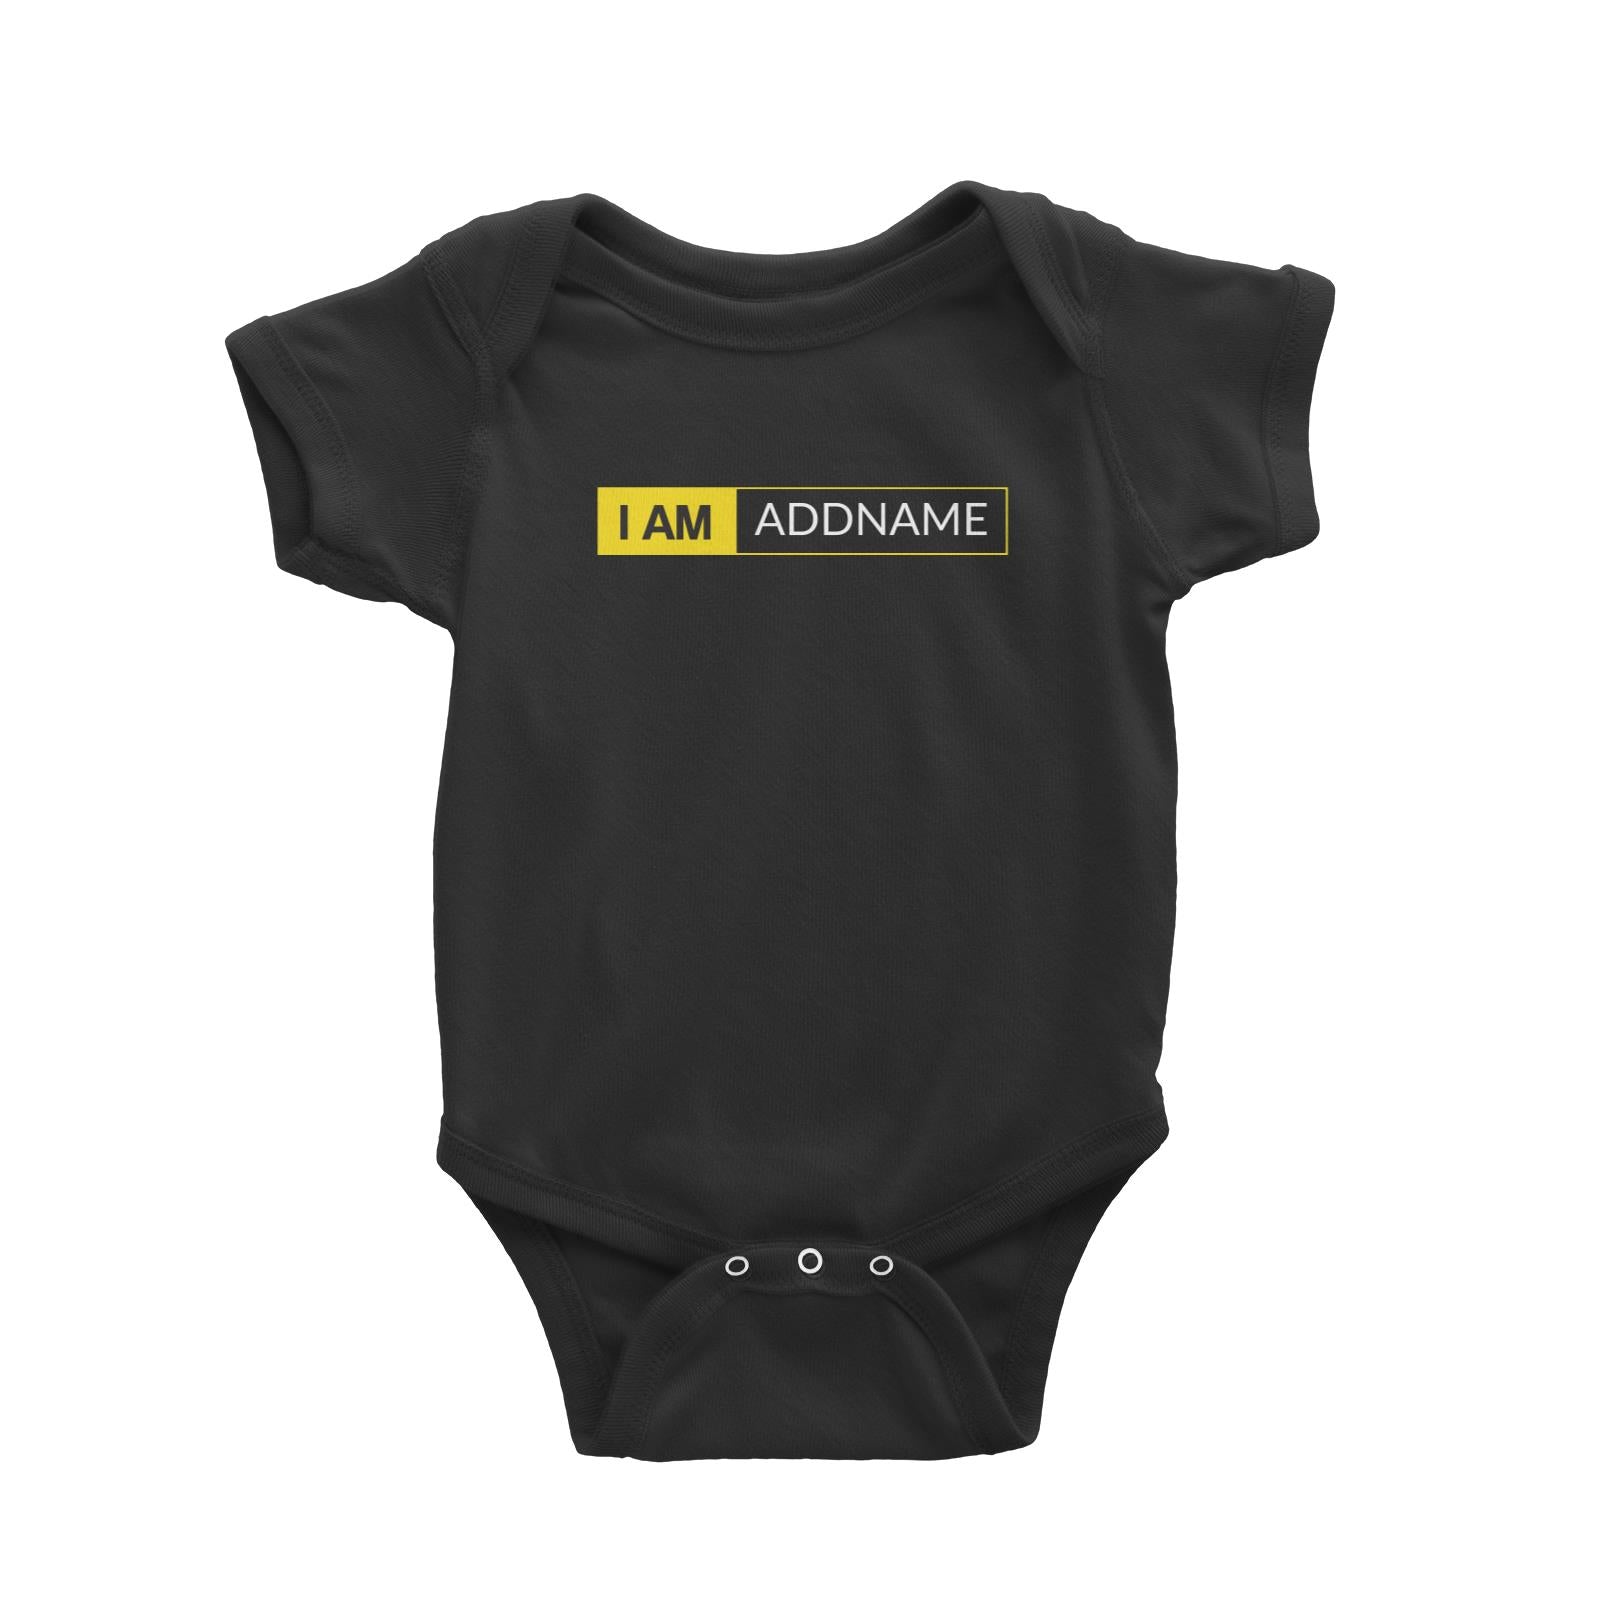 I AM Addname in Yellow Box Baby Romper Basic Nikon Matching Family Personalizable Designs